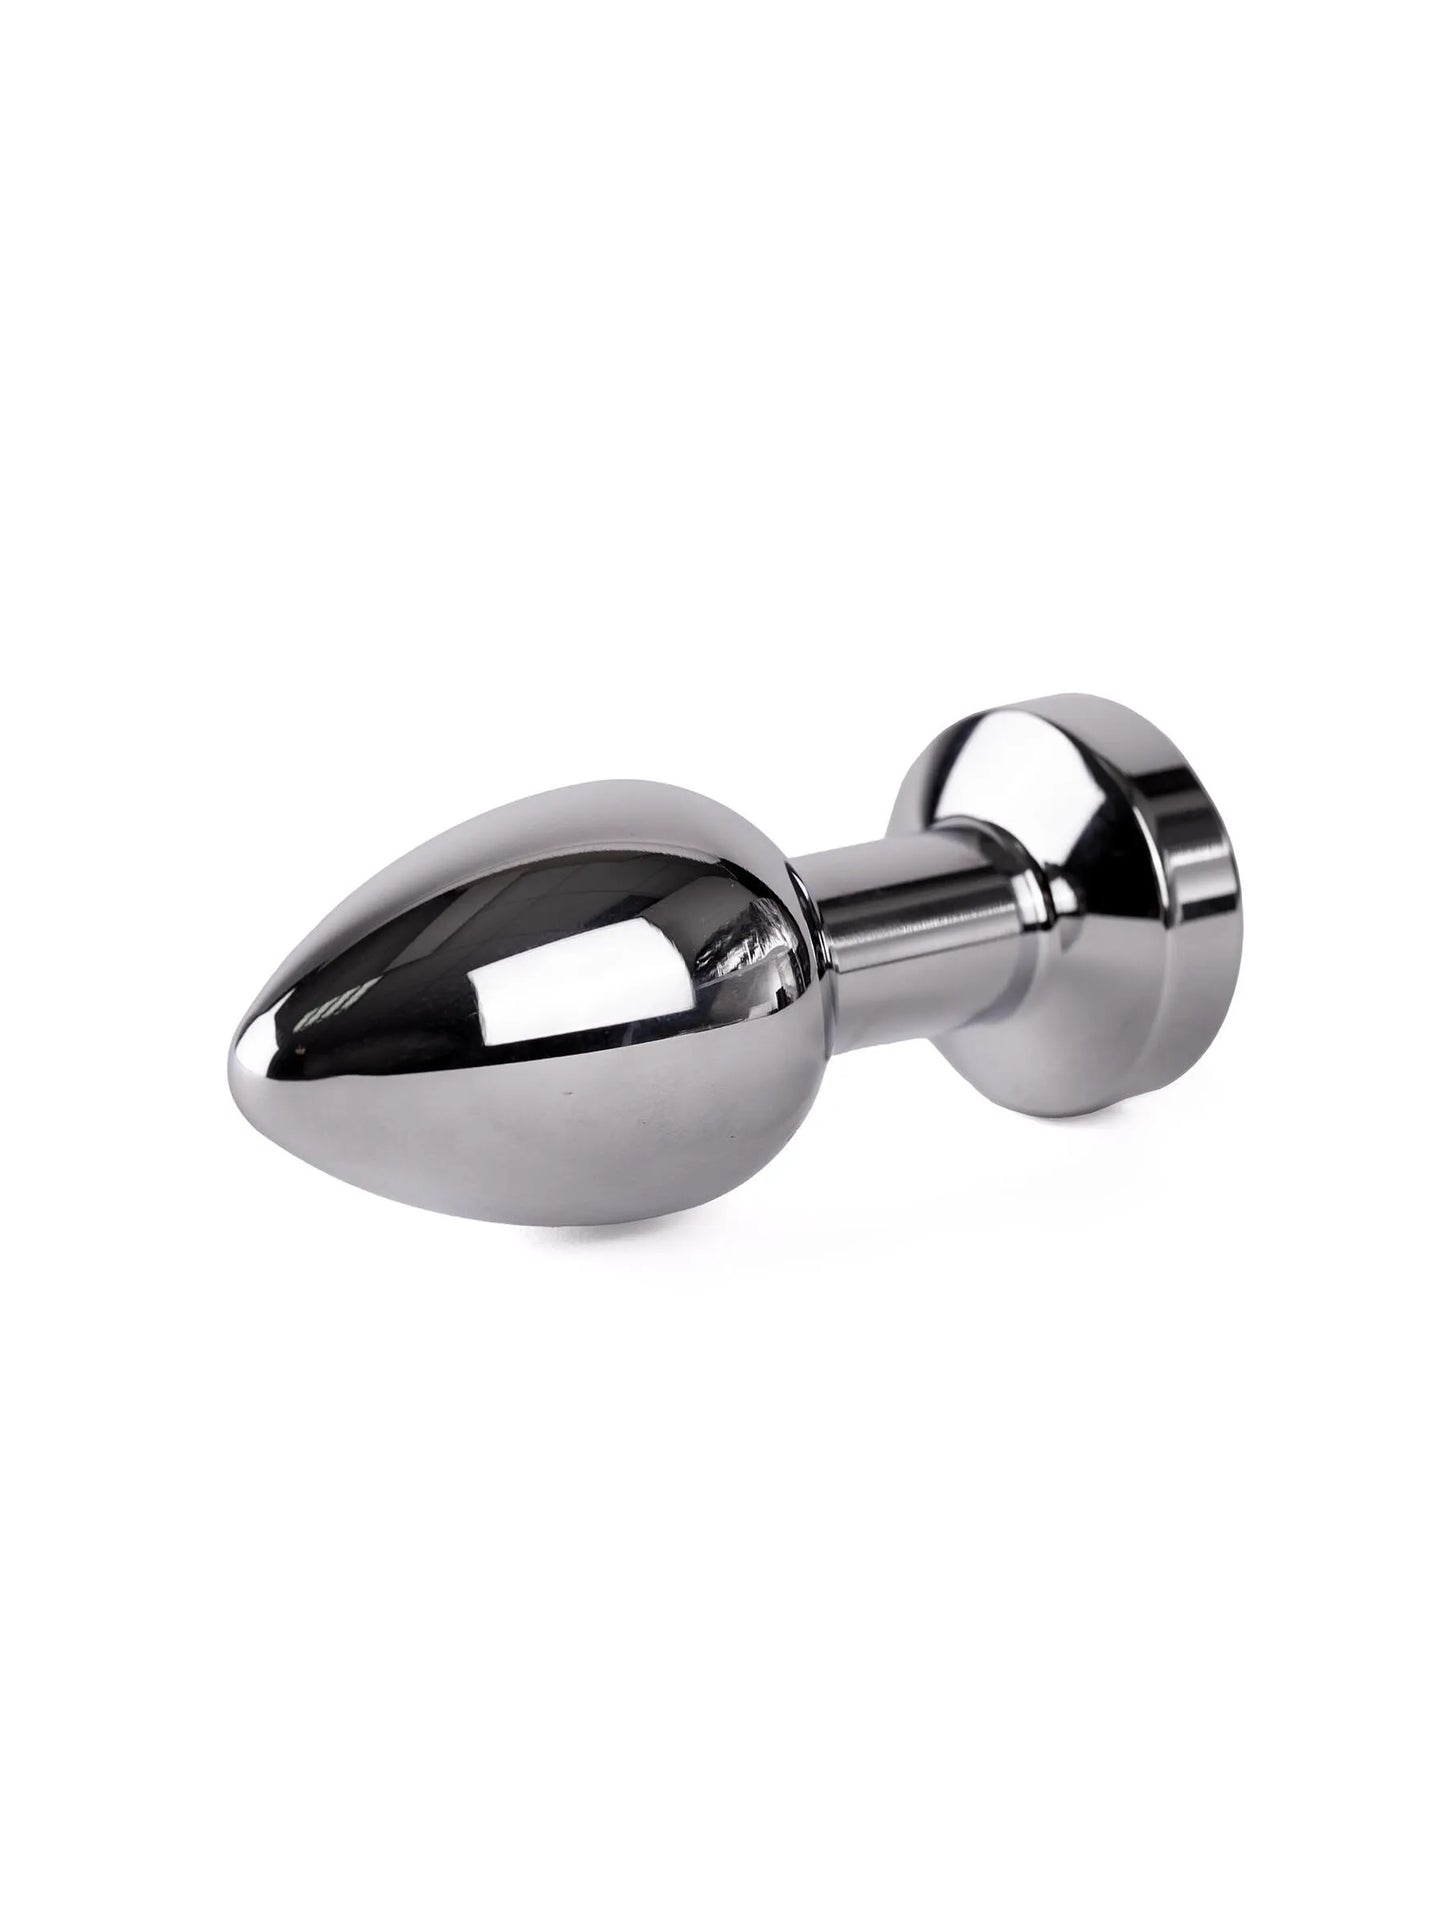 Metal Vibrating Anal Plug From Ann Summers, Image 02